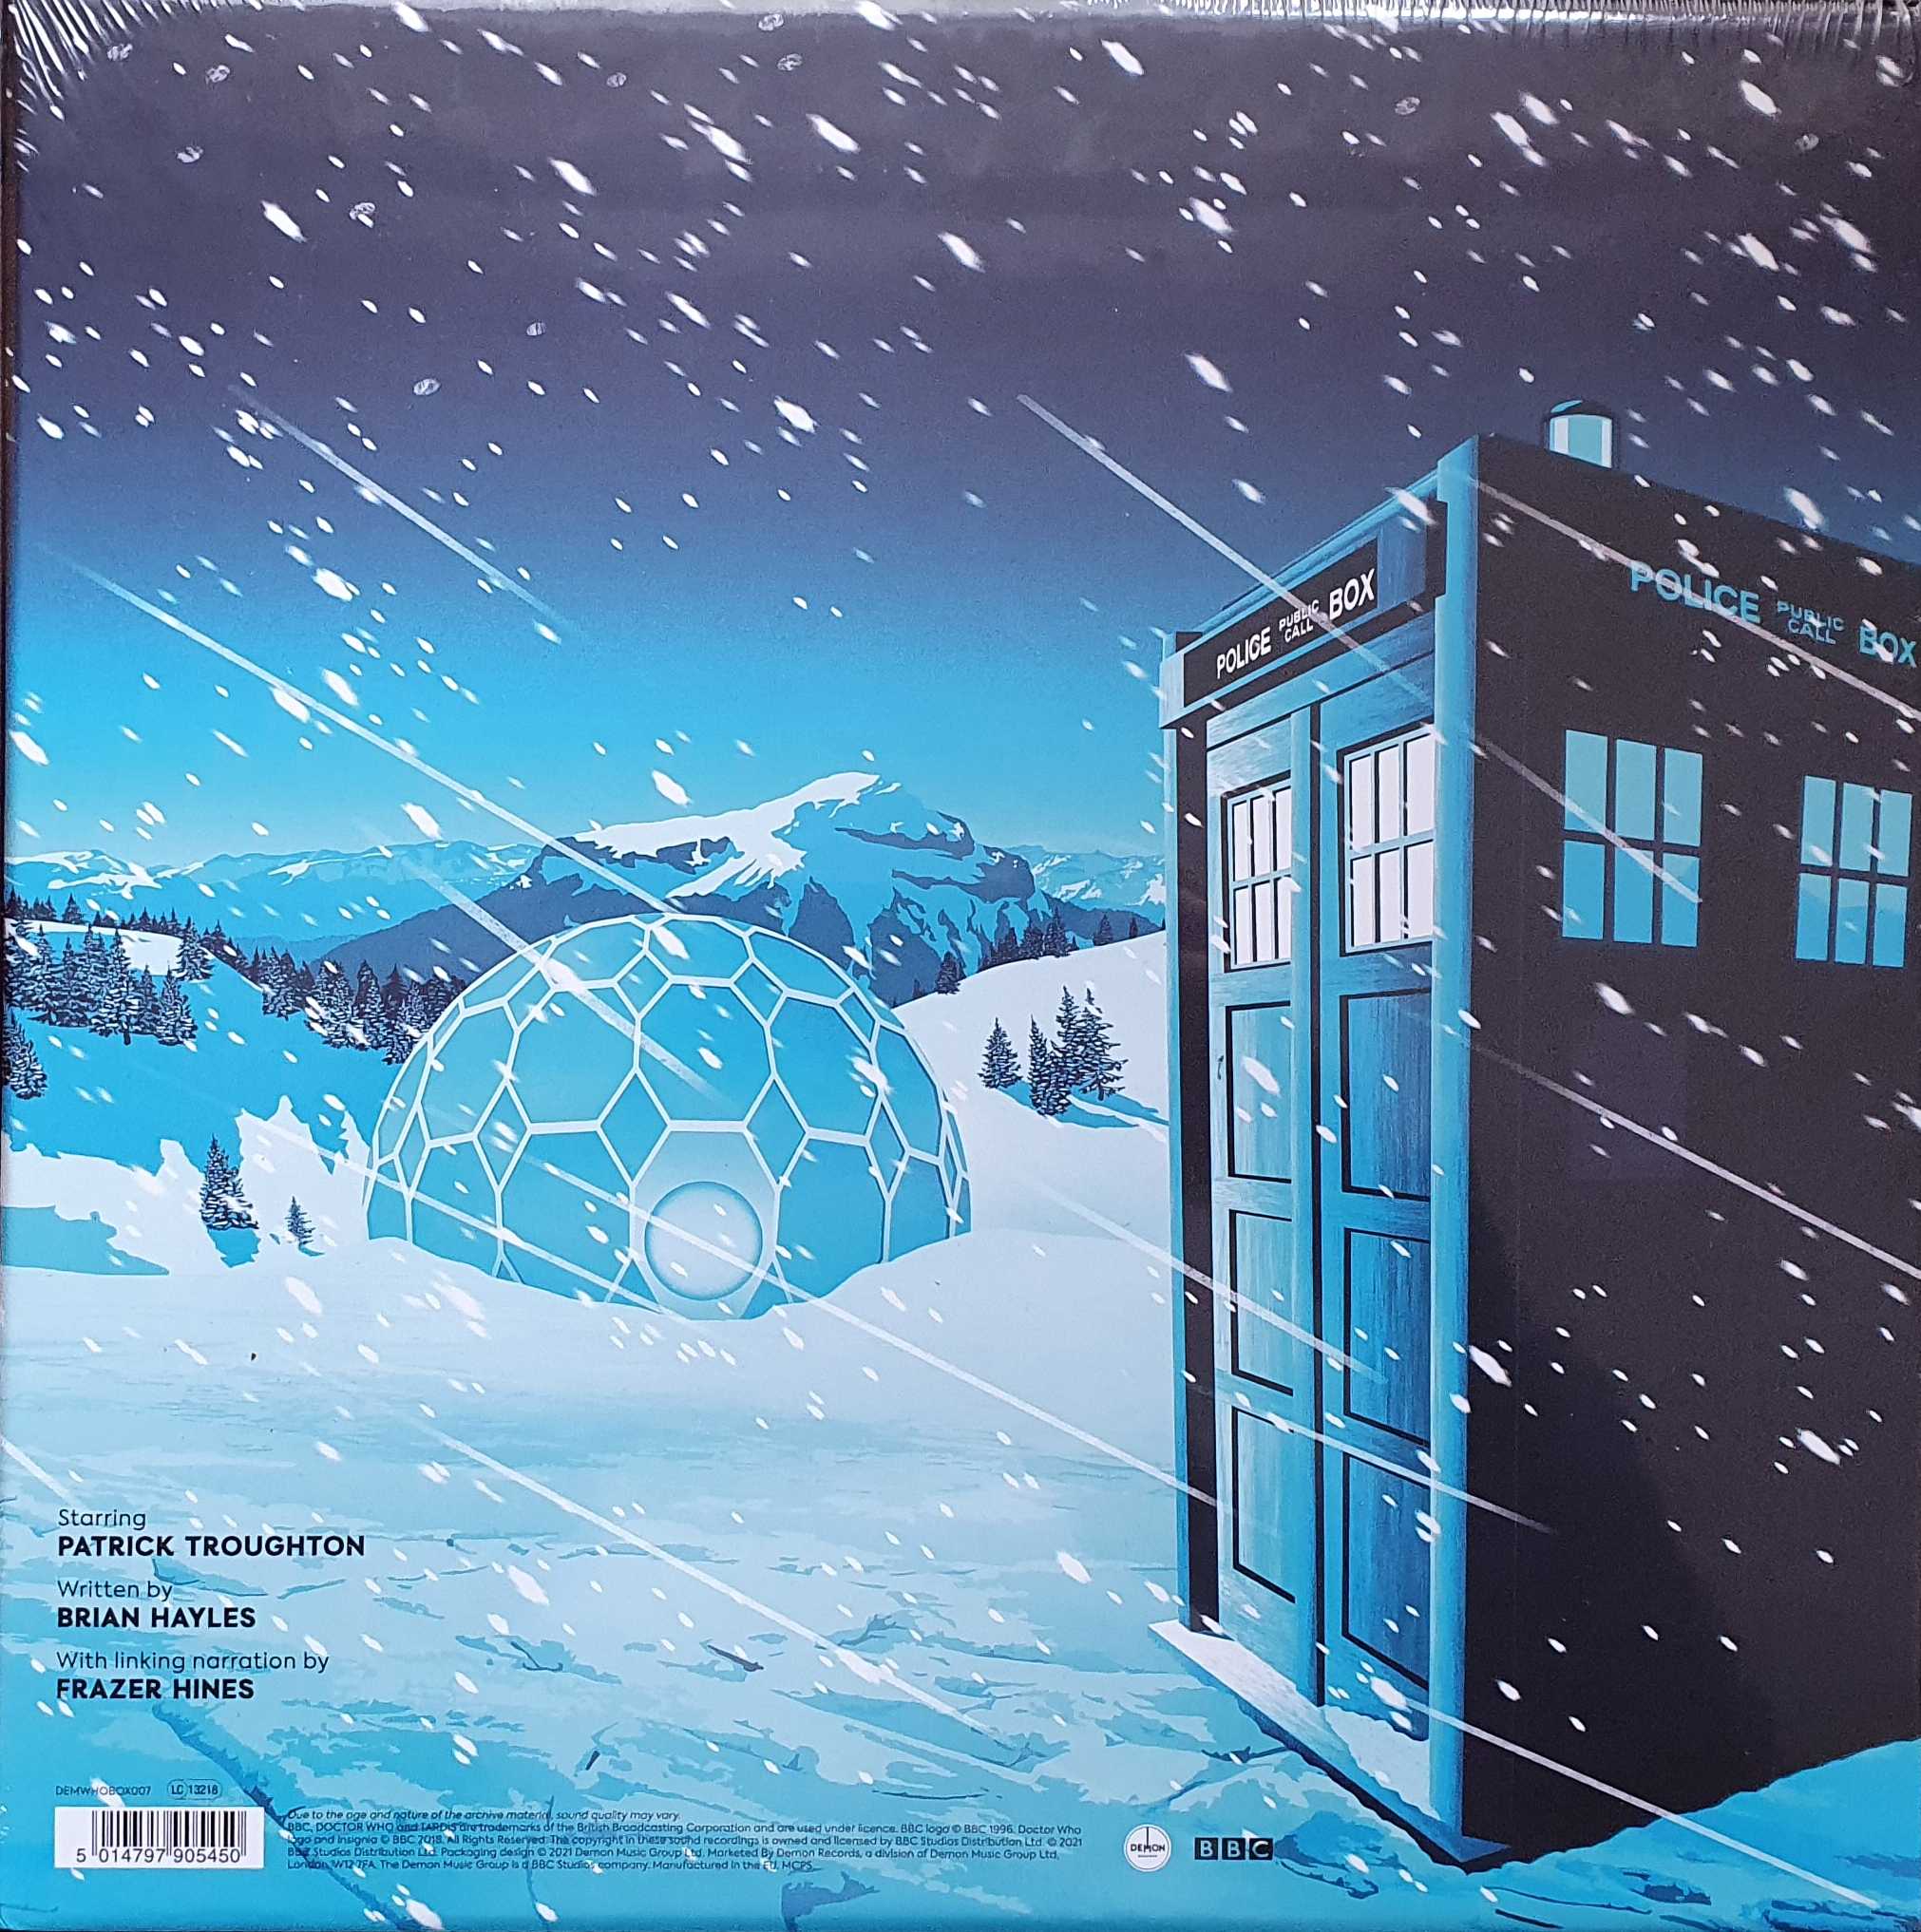 Picture of DEMWHOBOX007 Doctor Who - The Ice Warriors by artist Brian Hayles from the BBC records and Tapes library